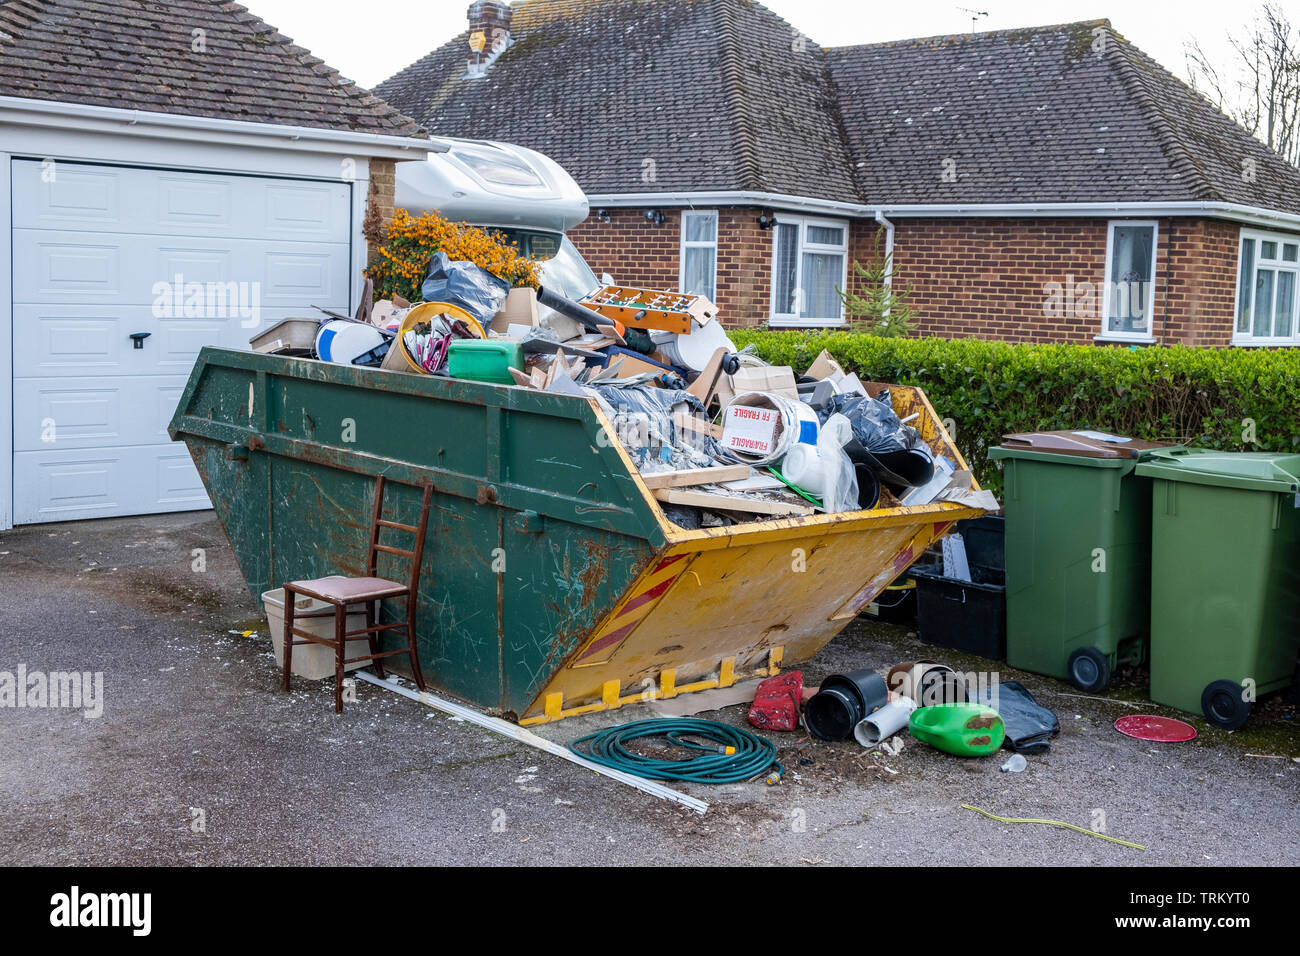 A full rubbish skip on a house driveway. Stock Photo